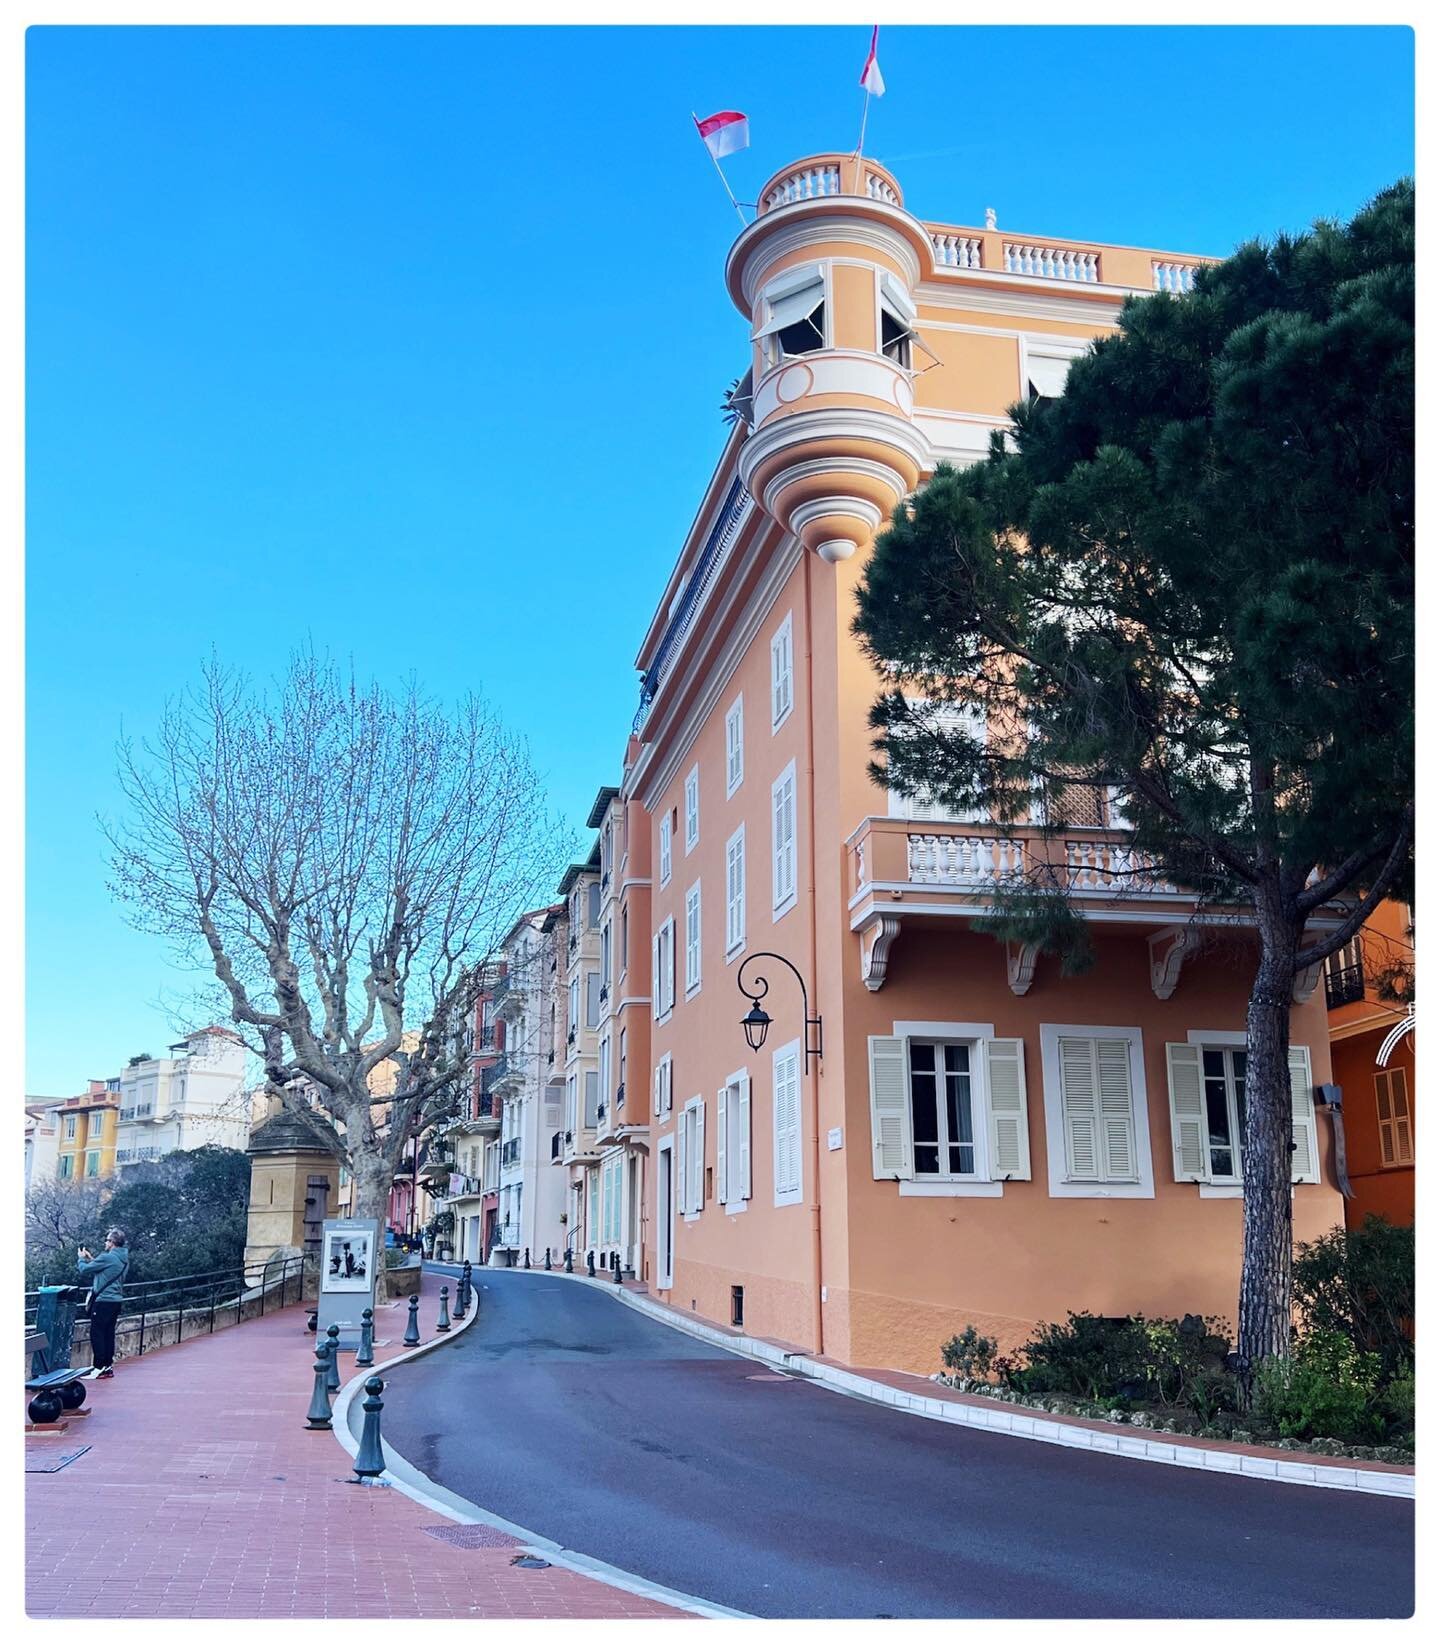 A Glimpse of Monaco&hellip;in town for the Bal de la Rose with @princessgraceus foundation and always in awe of how beautiful, clean, and safe this country is. The last photo shows the church where Grace Kelly is buried. More in Stories&hellip;